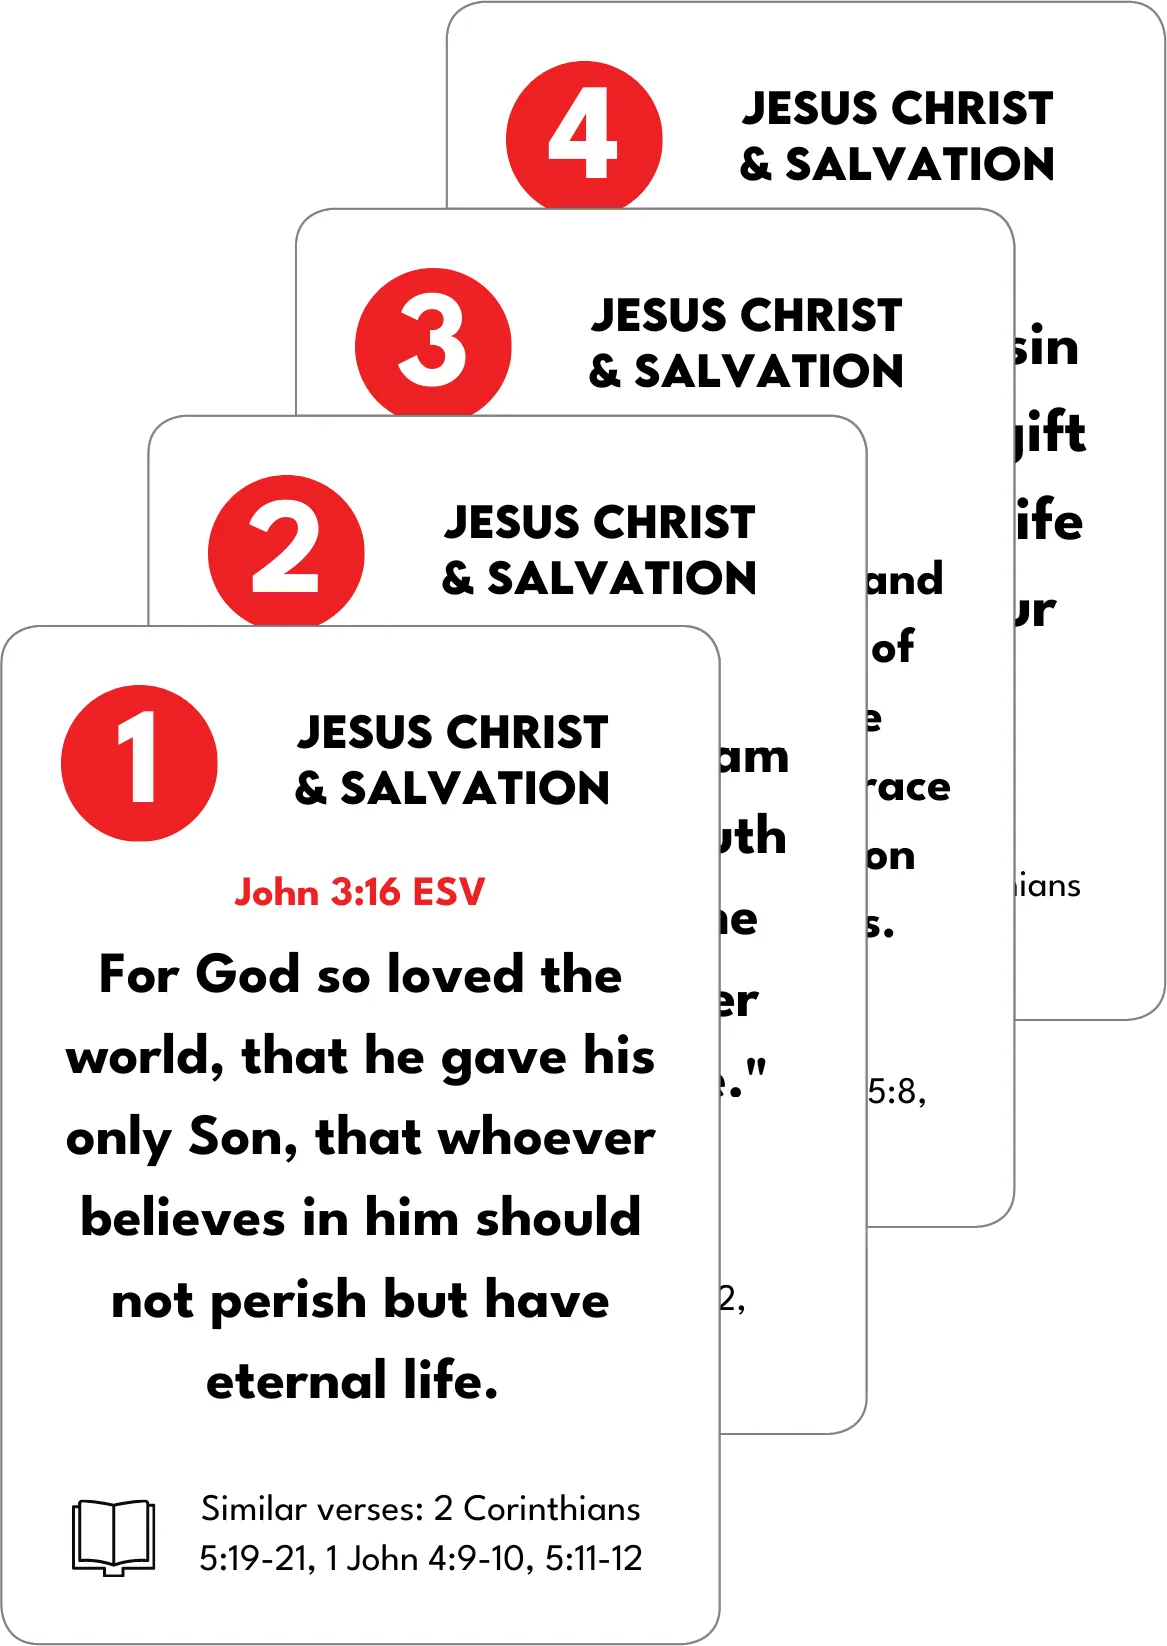 Power Pack Card Deck: 52 Memory Verses Every Christian Should Know